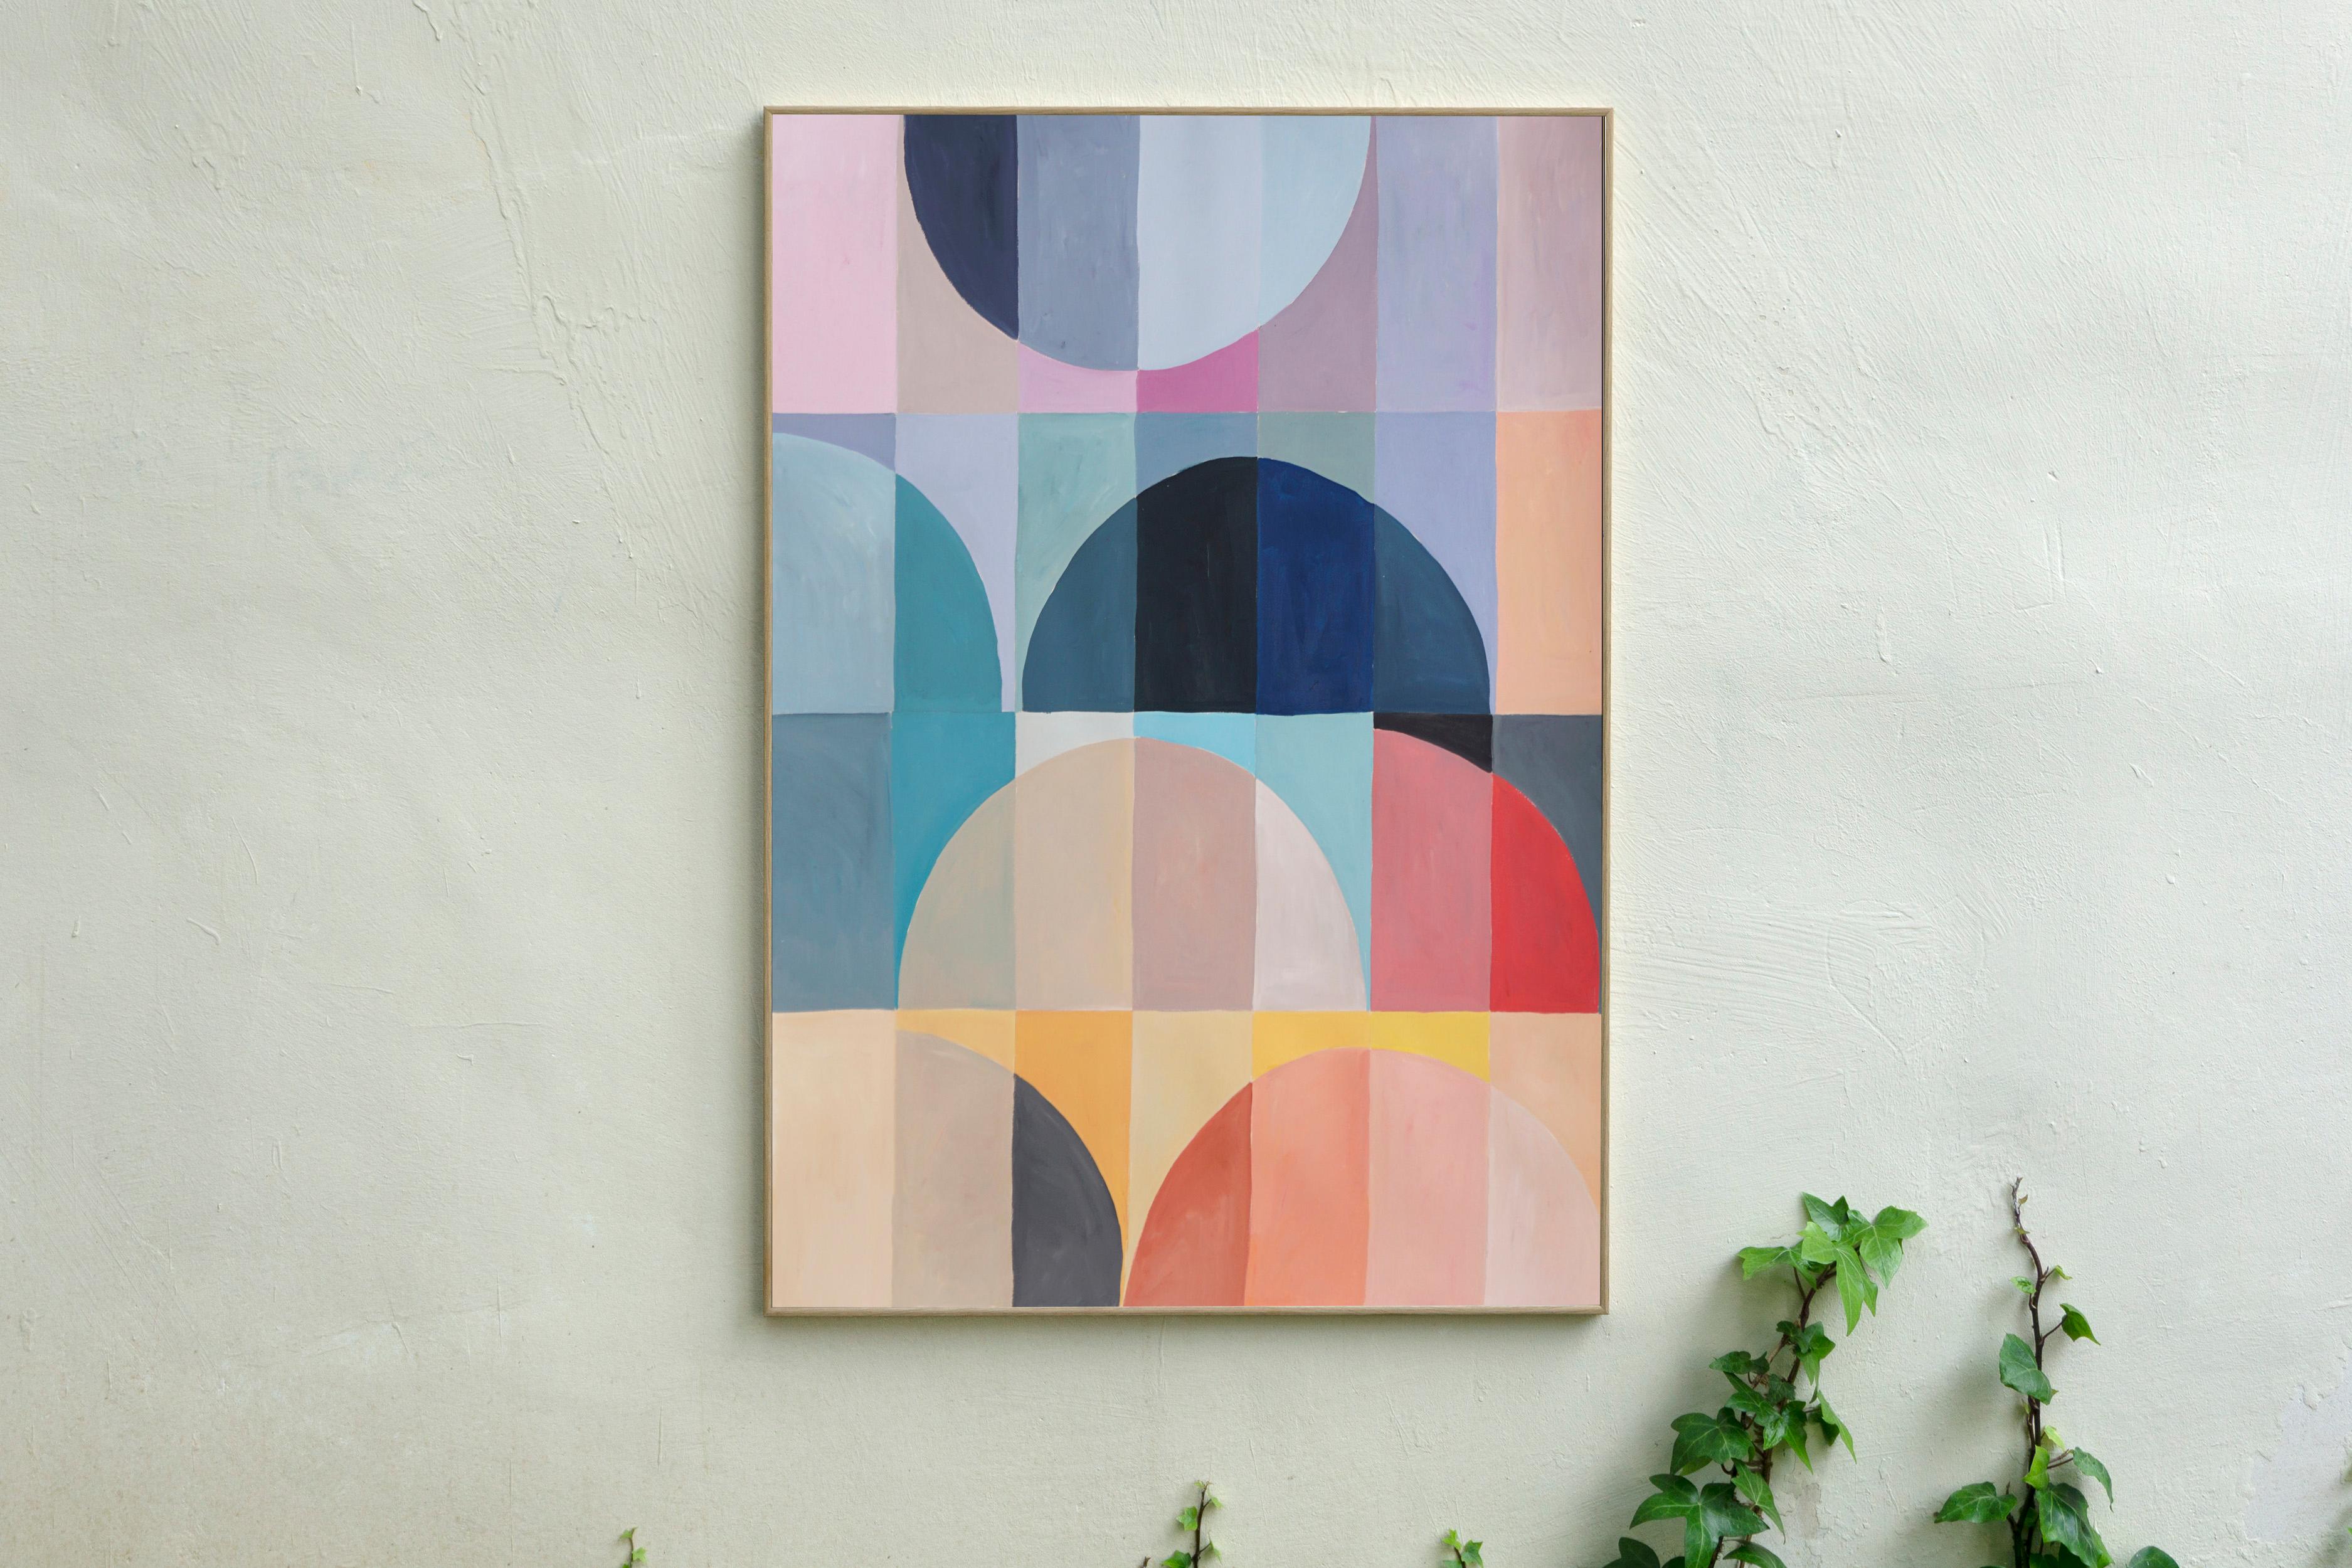 Deconstructed Gems, Abstract Geometric Primary Tones Transitions, Vertical Grid - Painting by Natalia Roman